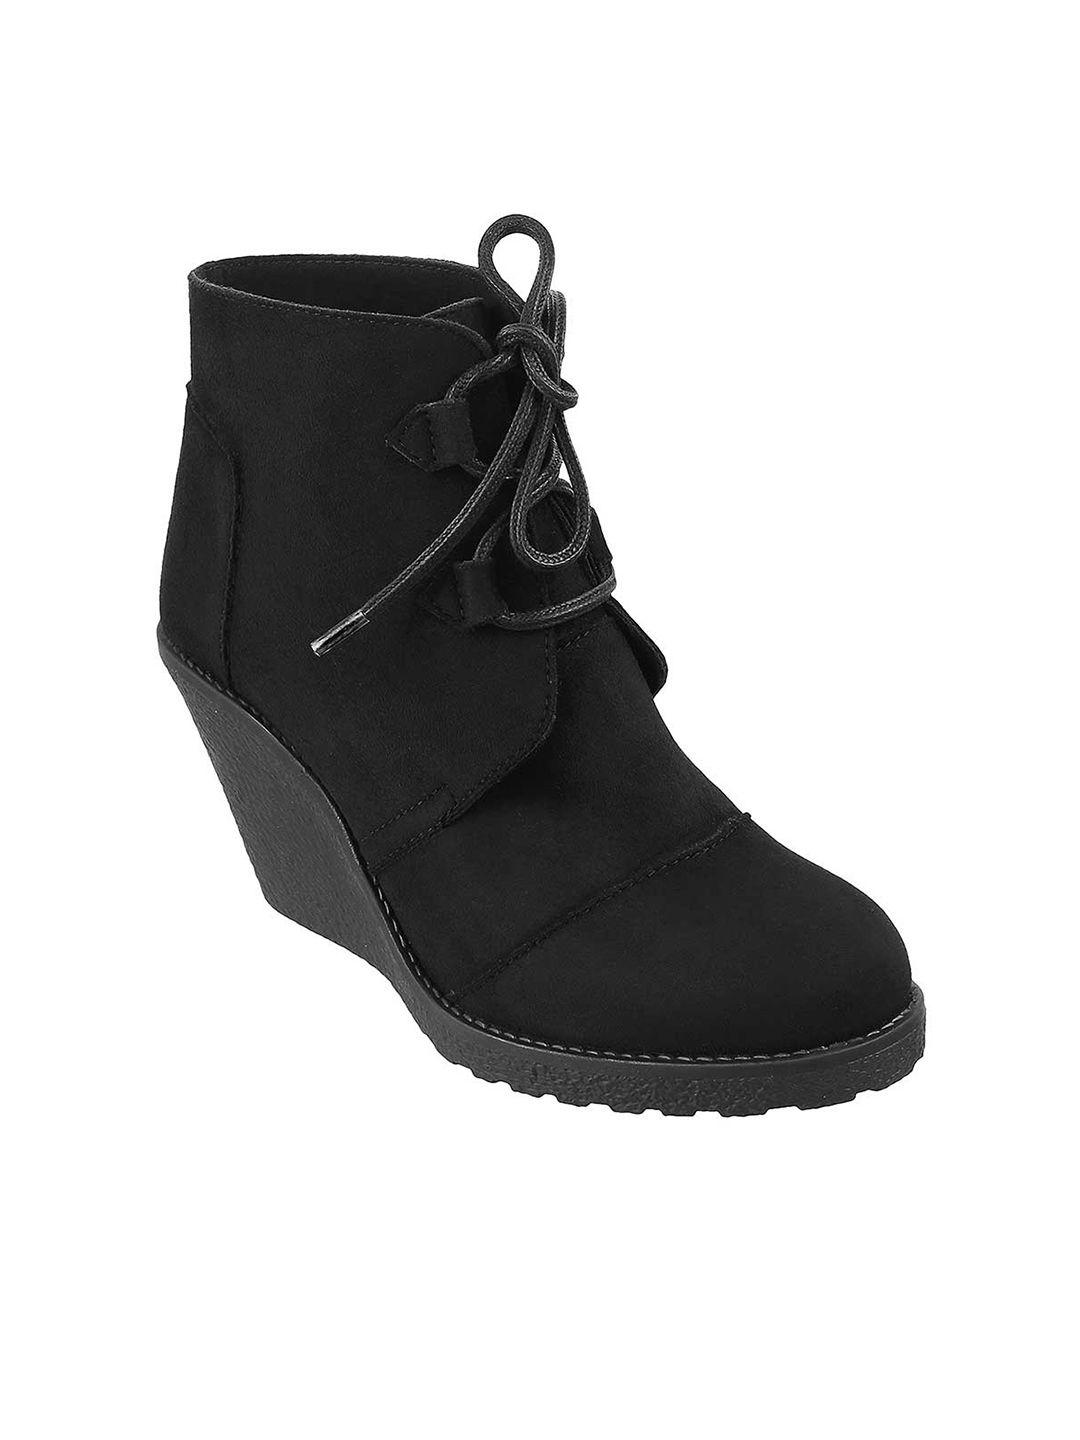 catwalk-black-textured-party-wedge-heeled-boots